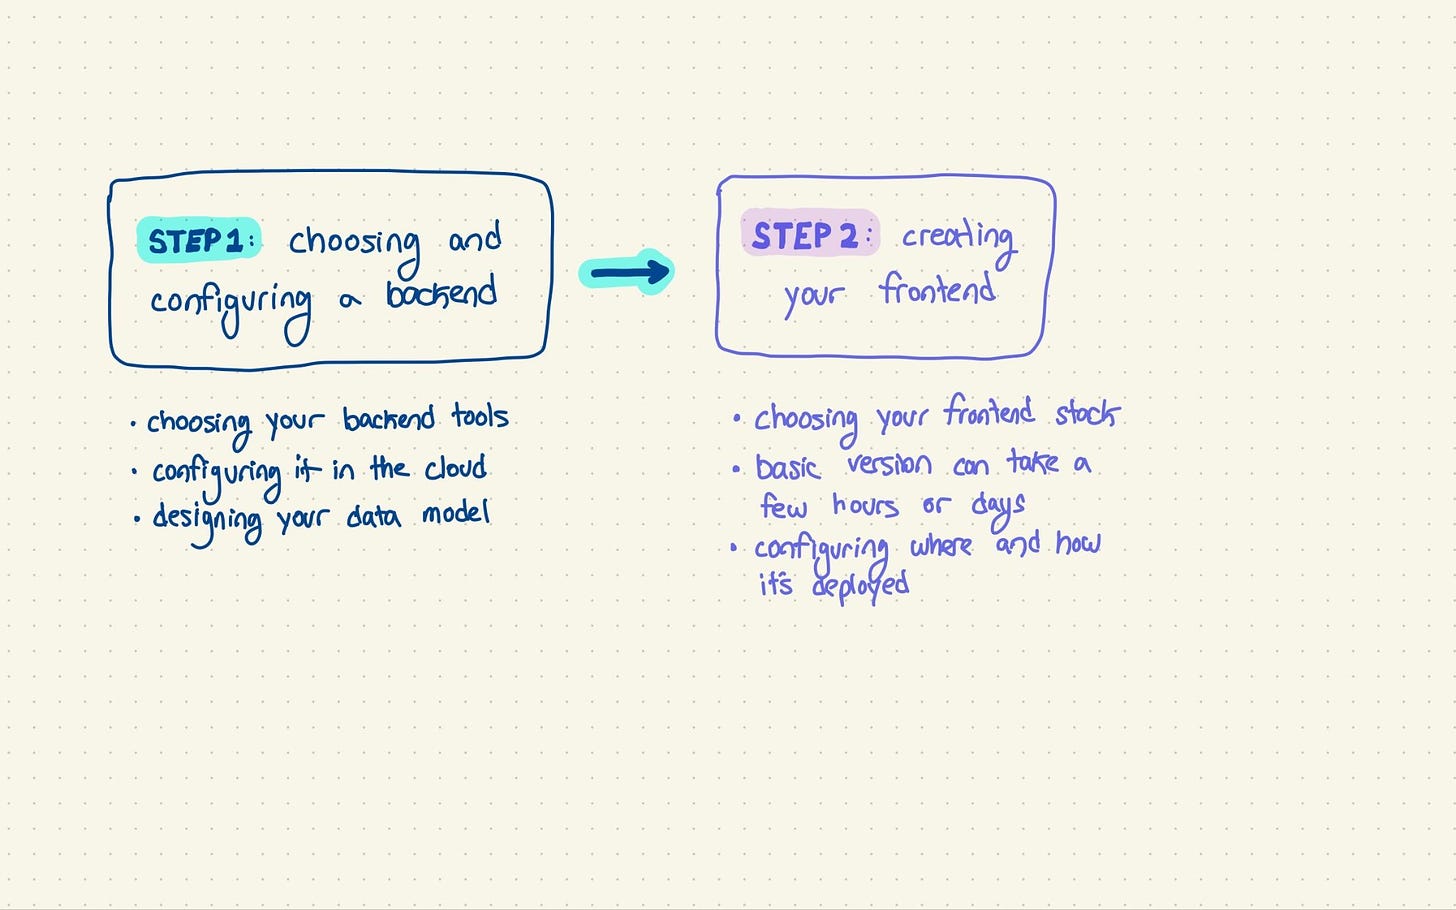 adding to previous image, text: Step 2: Creating your frontend: Choosing your frontend stack, basic version can take a few hours or days, configuring how and where it is deployed